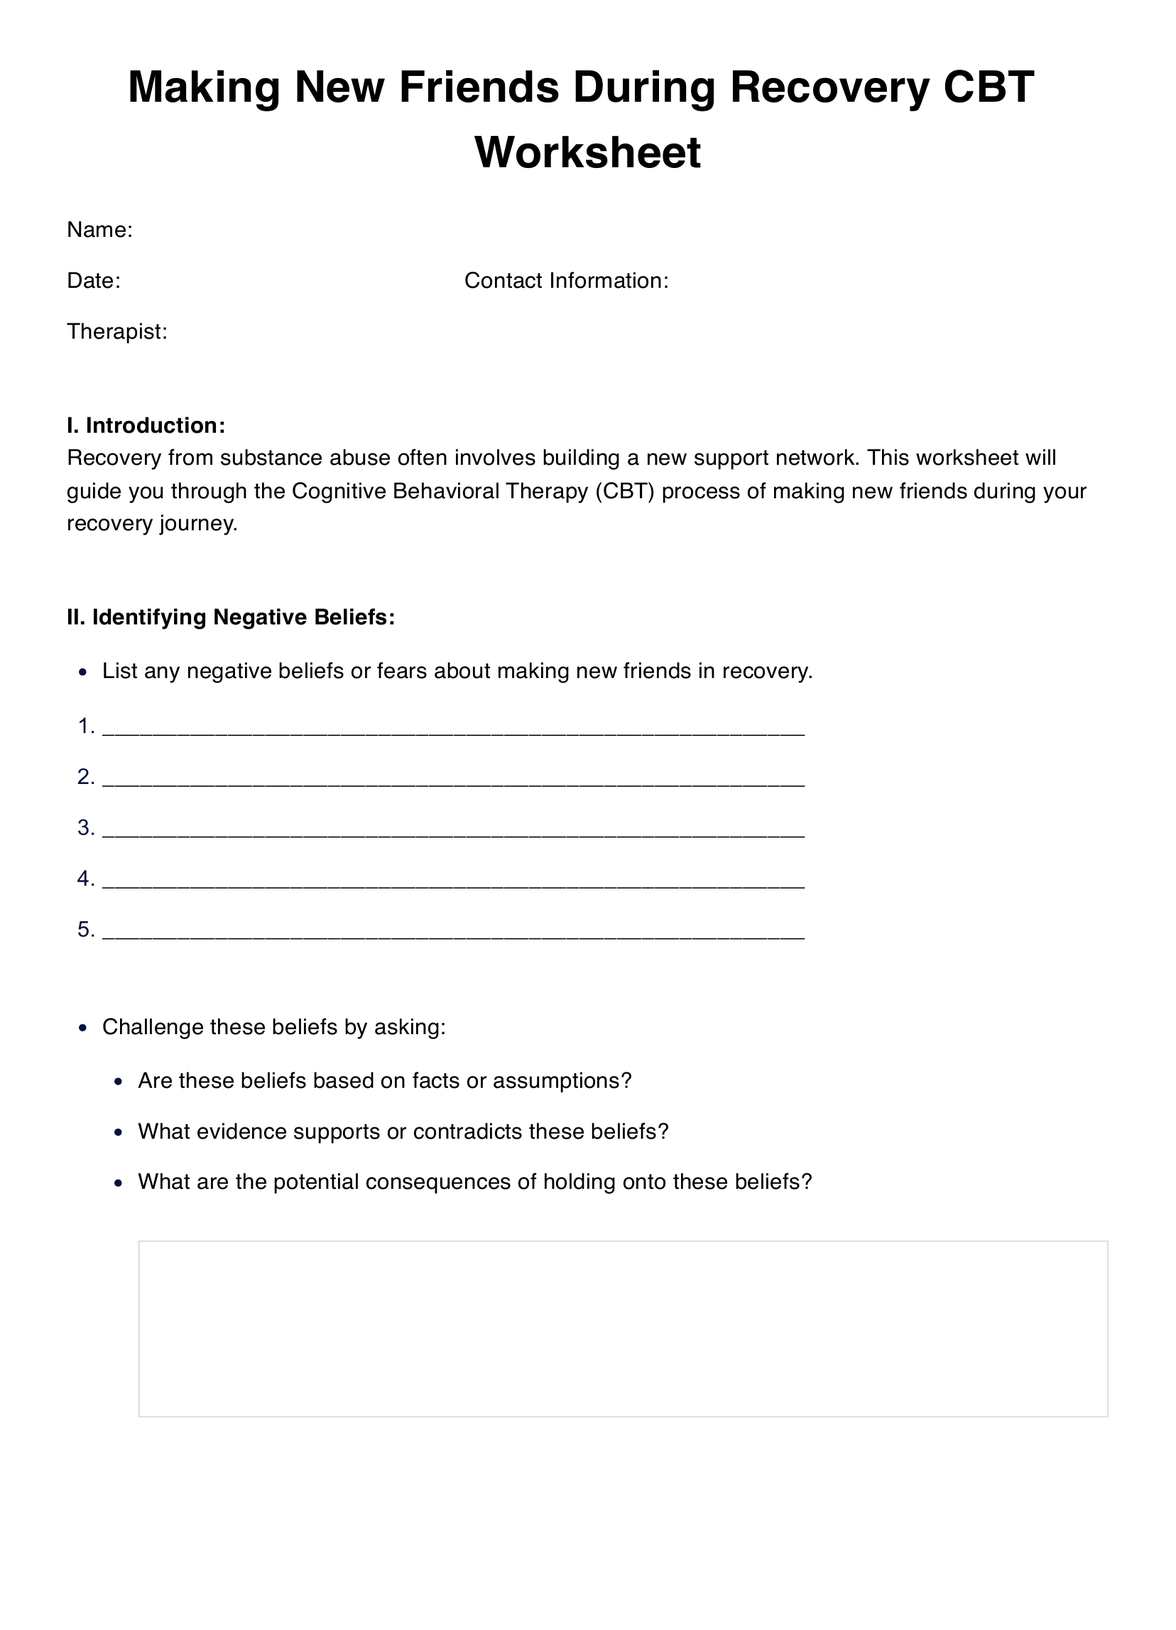 Making New Friends During Recovery CBT Worksheets PDF Example